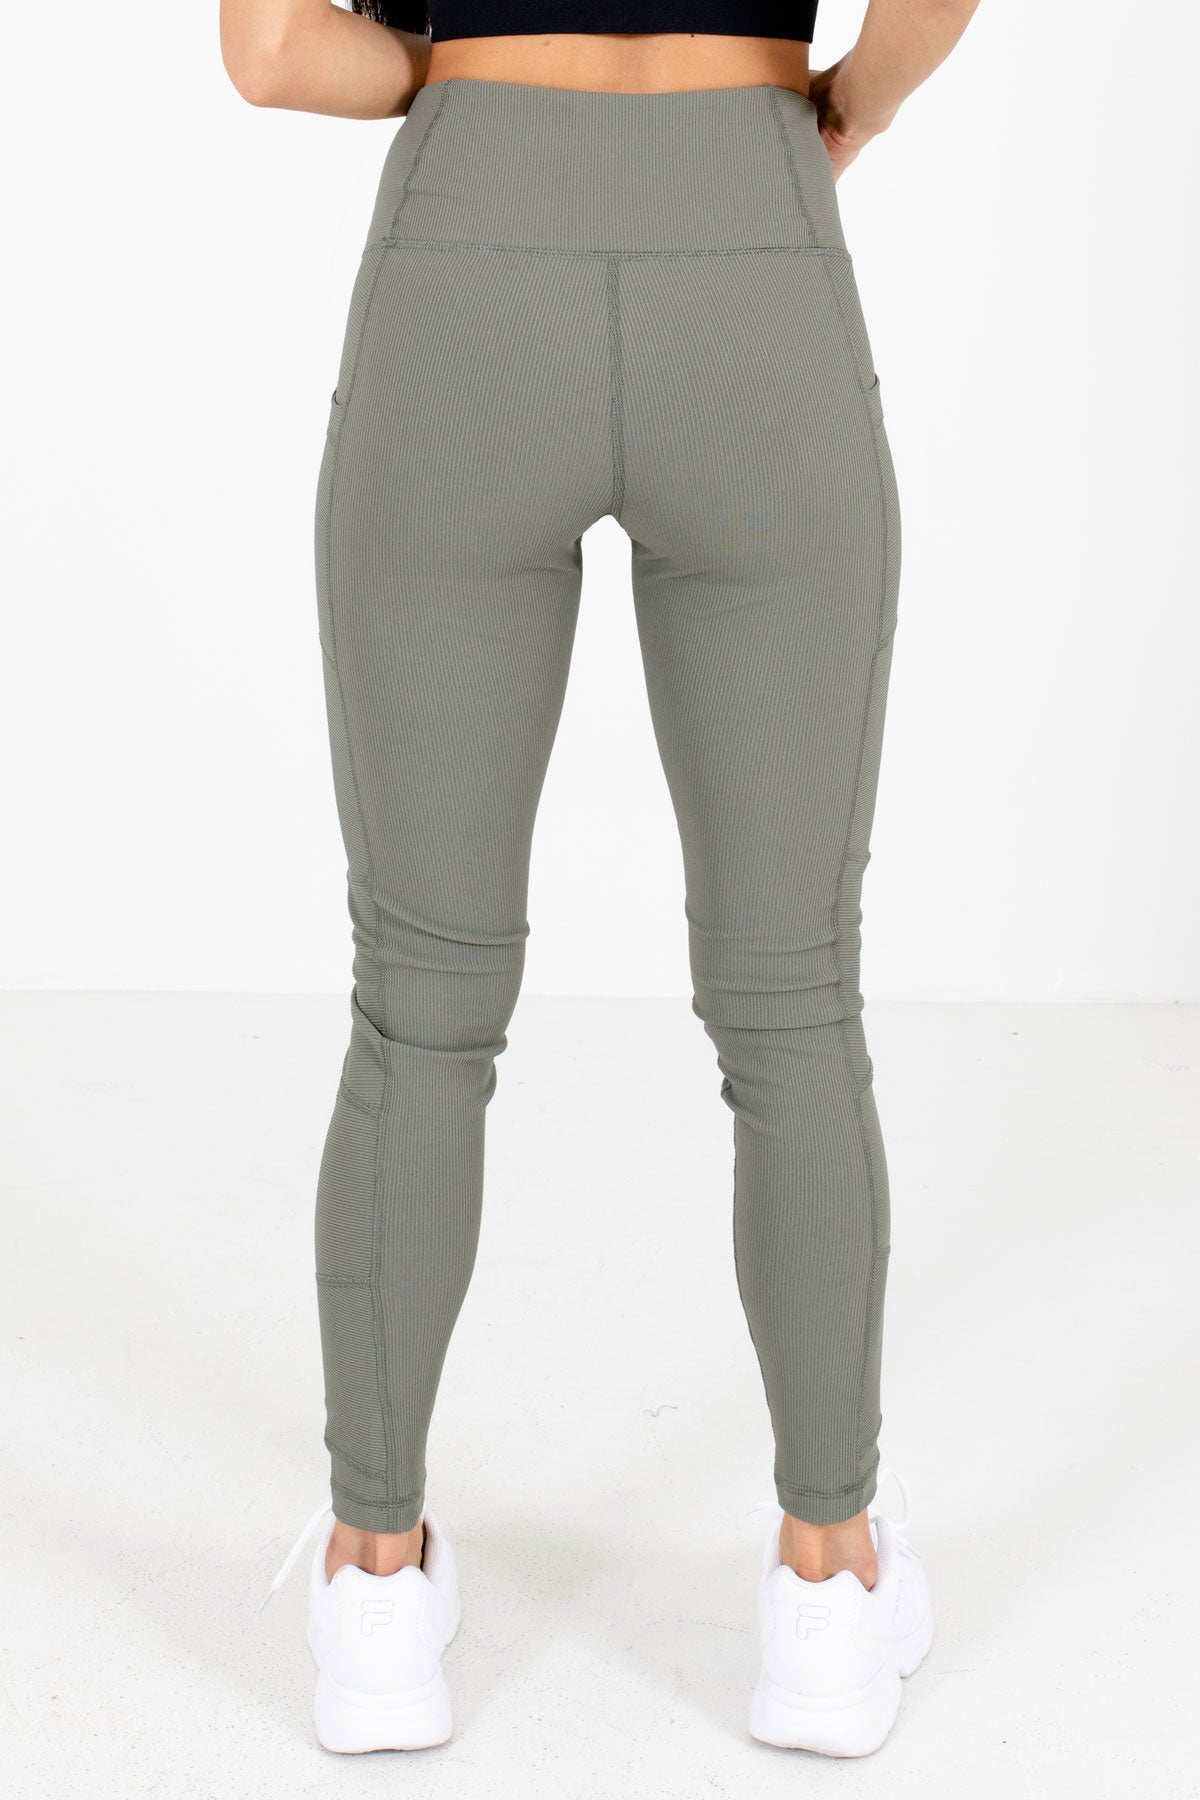 Women's Olive Green Boutique Active Leggings with Thigh Pockets